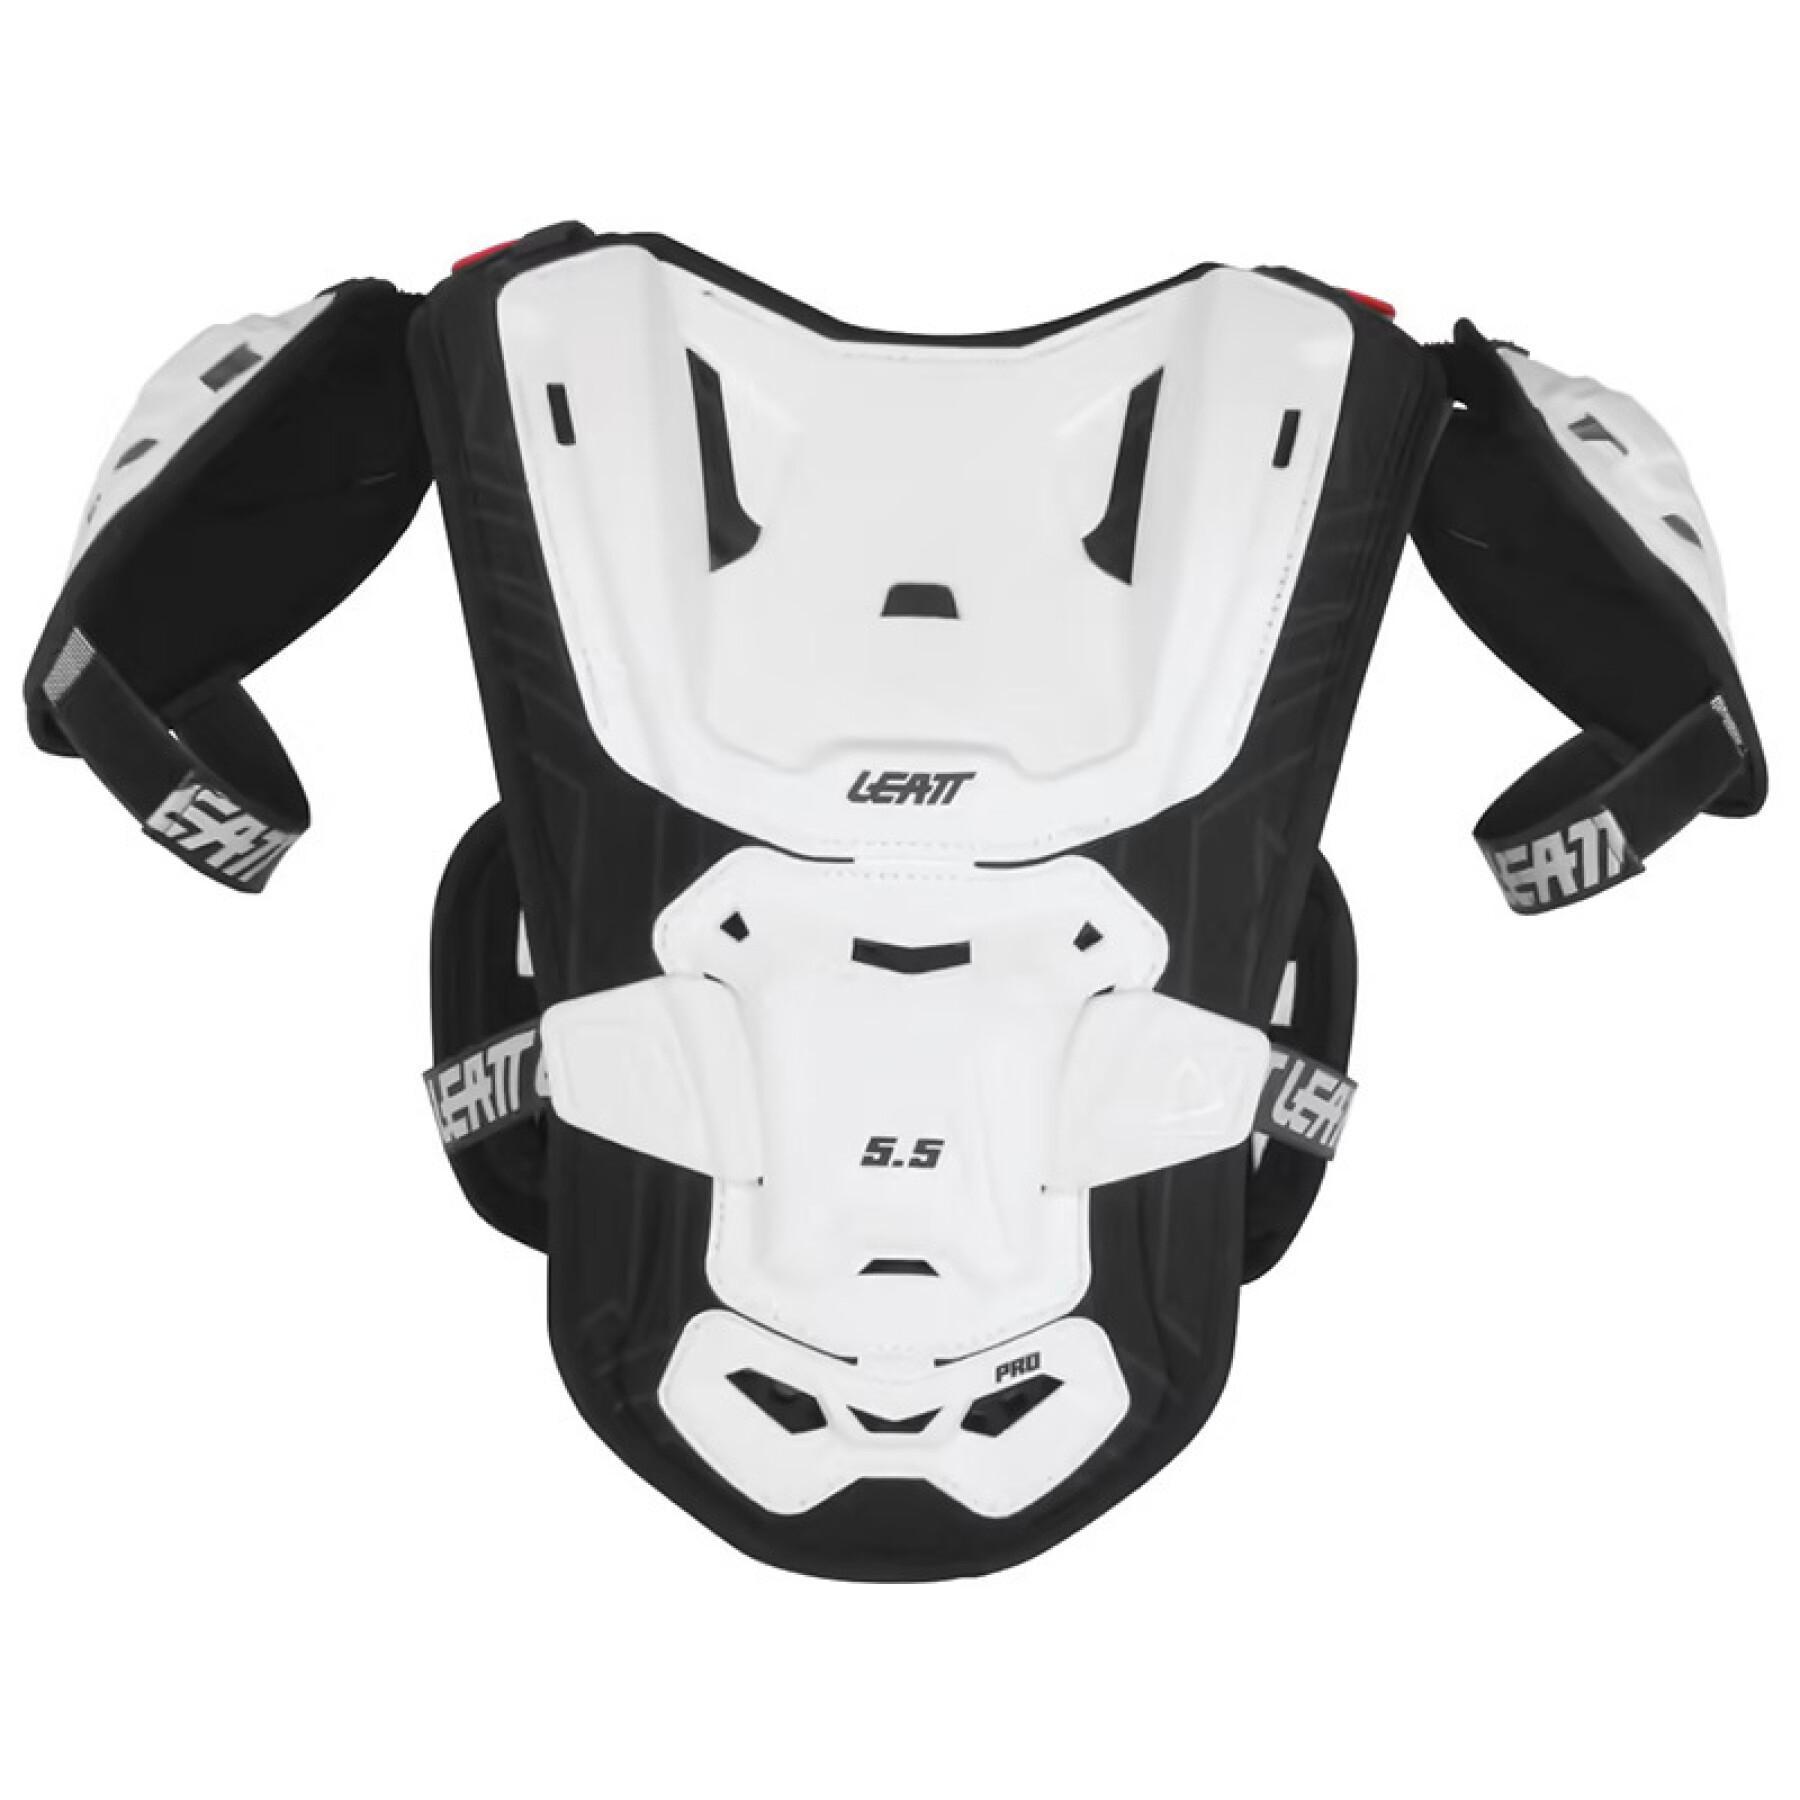 Child's motorcycle chest protector Leatt 5.5 Pro